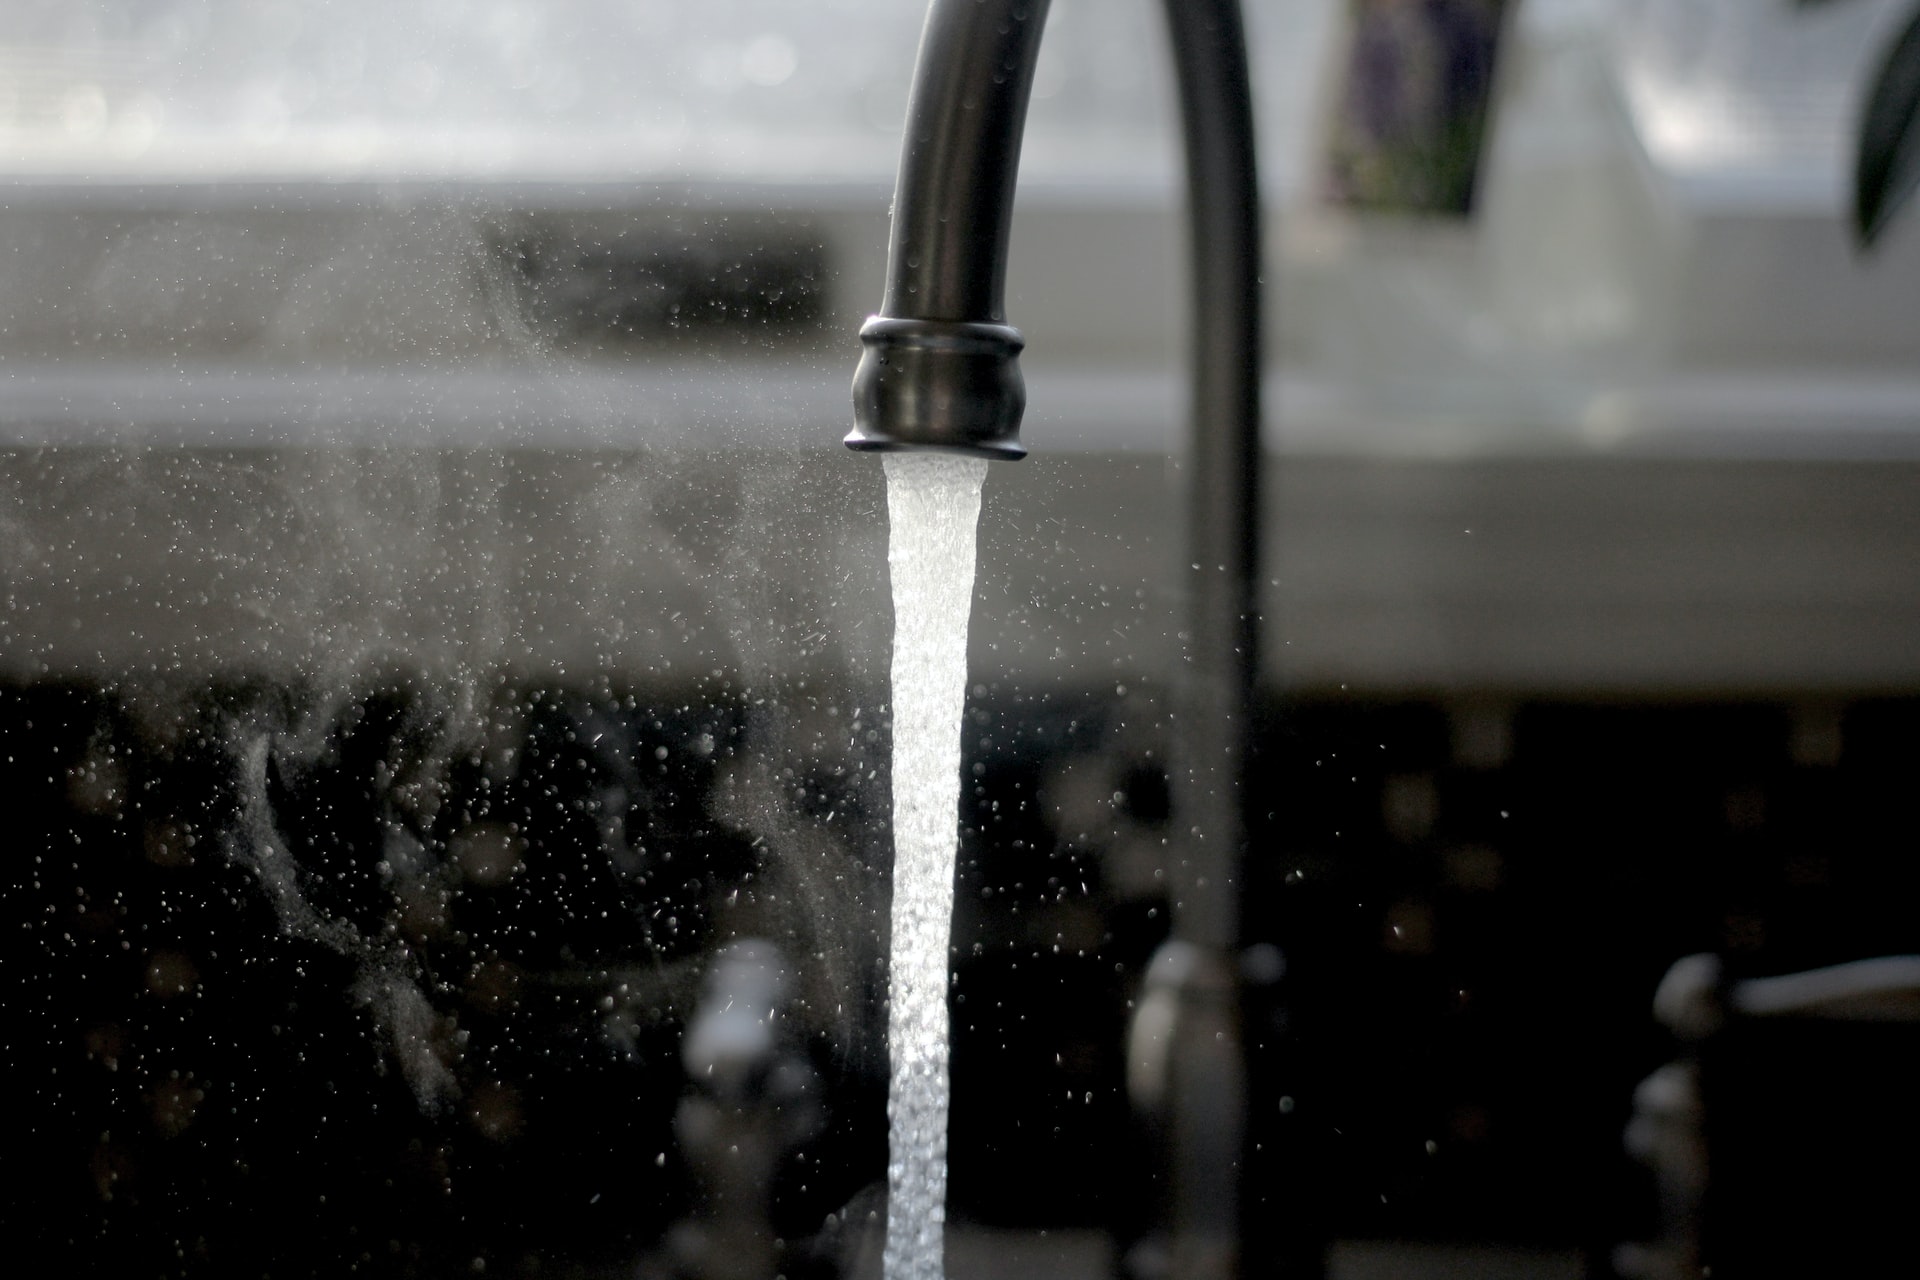 4 ways to fix a clogged sink – do it quickly and efficiently!